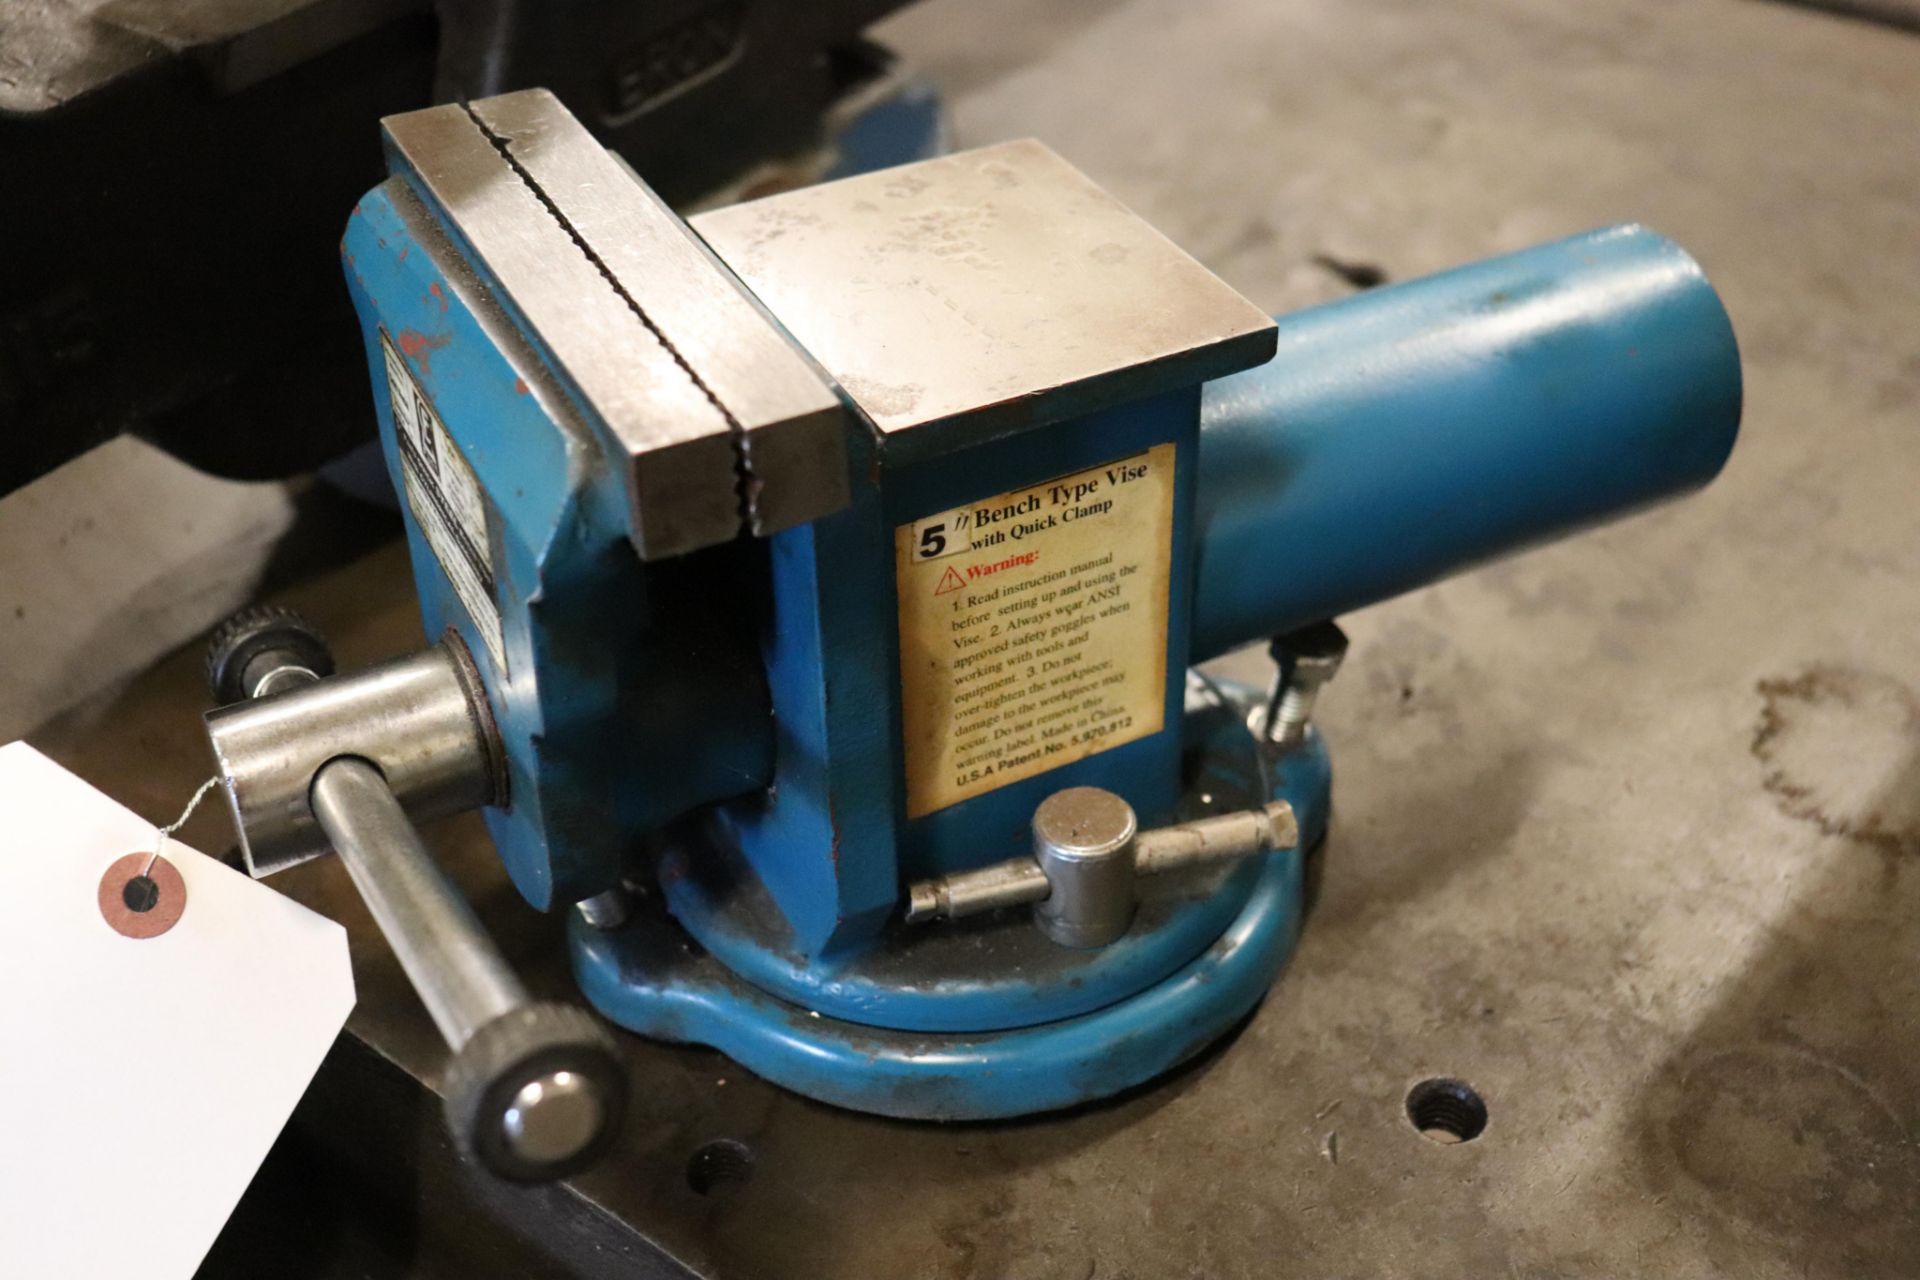 5" bench vise - Image 3 of 3